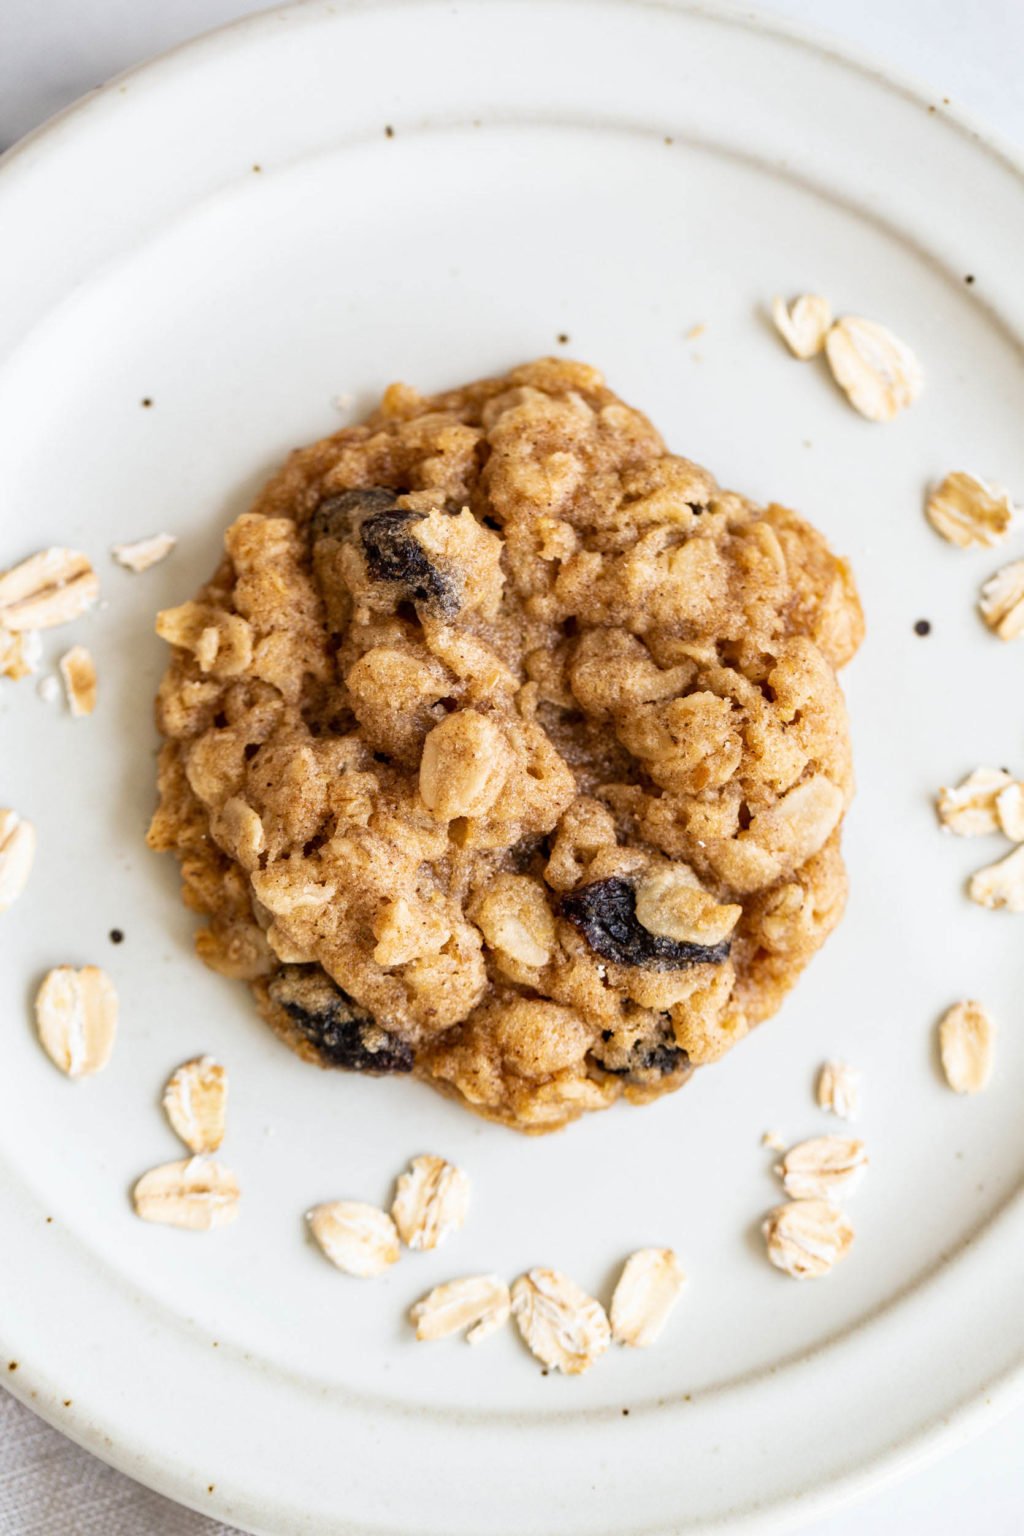 A single, chewy oatmeal raisin cookie rests on a white plate.